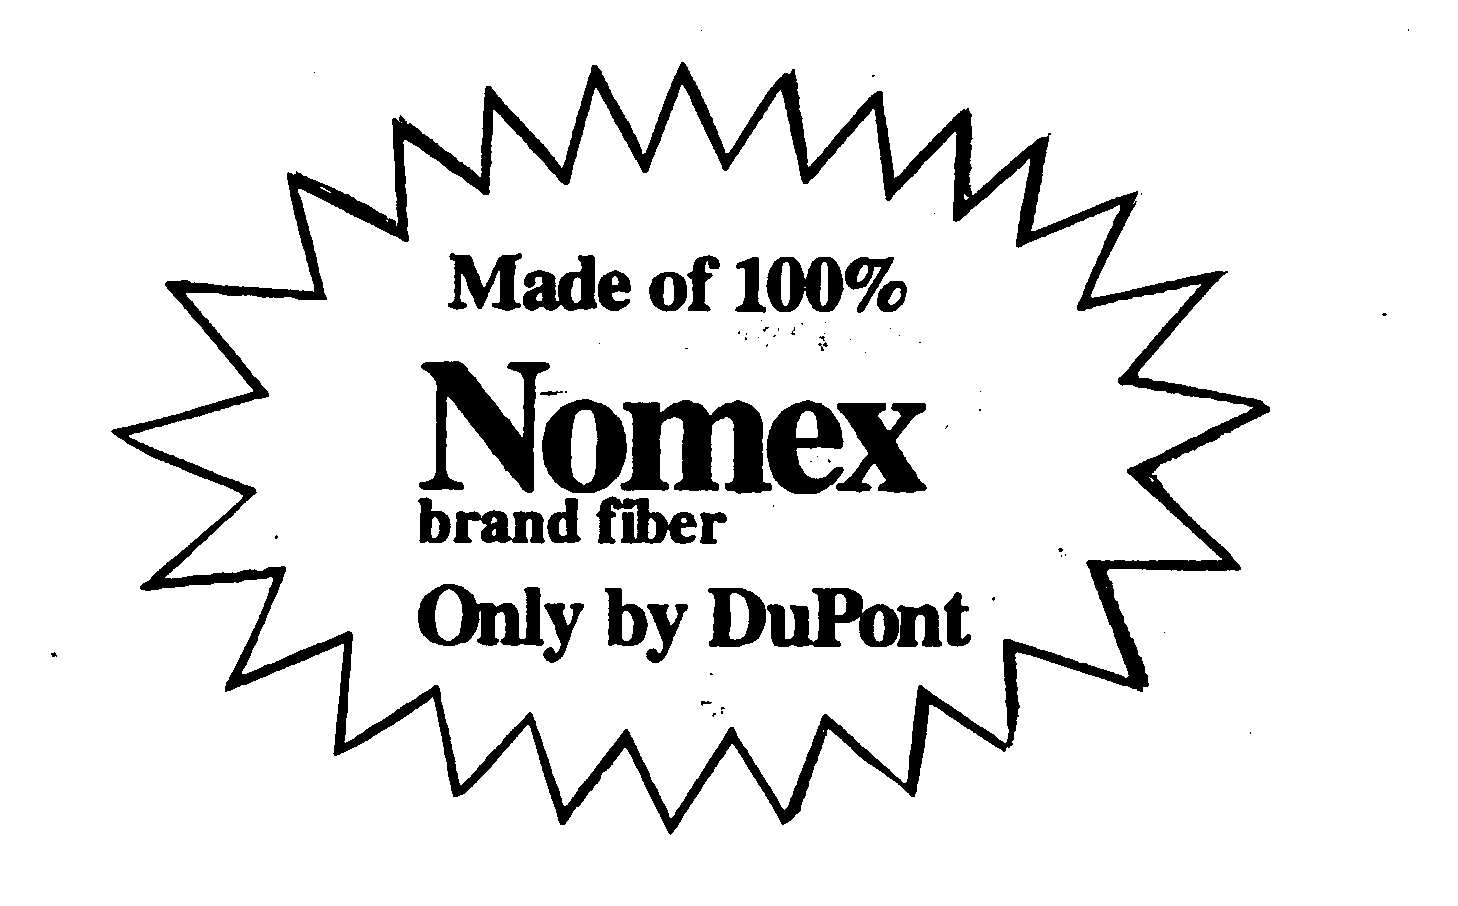  MADE OF 100% NOMEX BRAND FIBER ONLY BY DUPONT